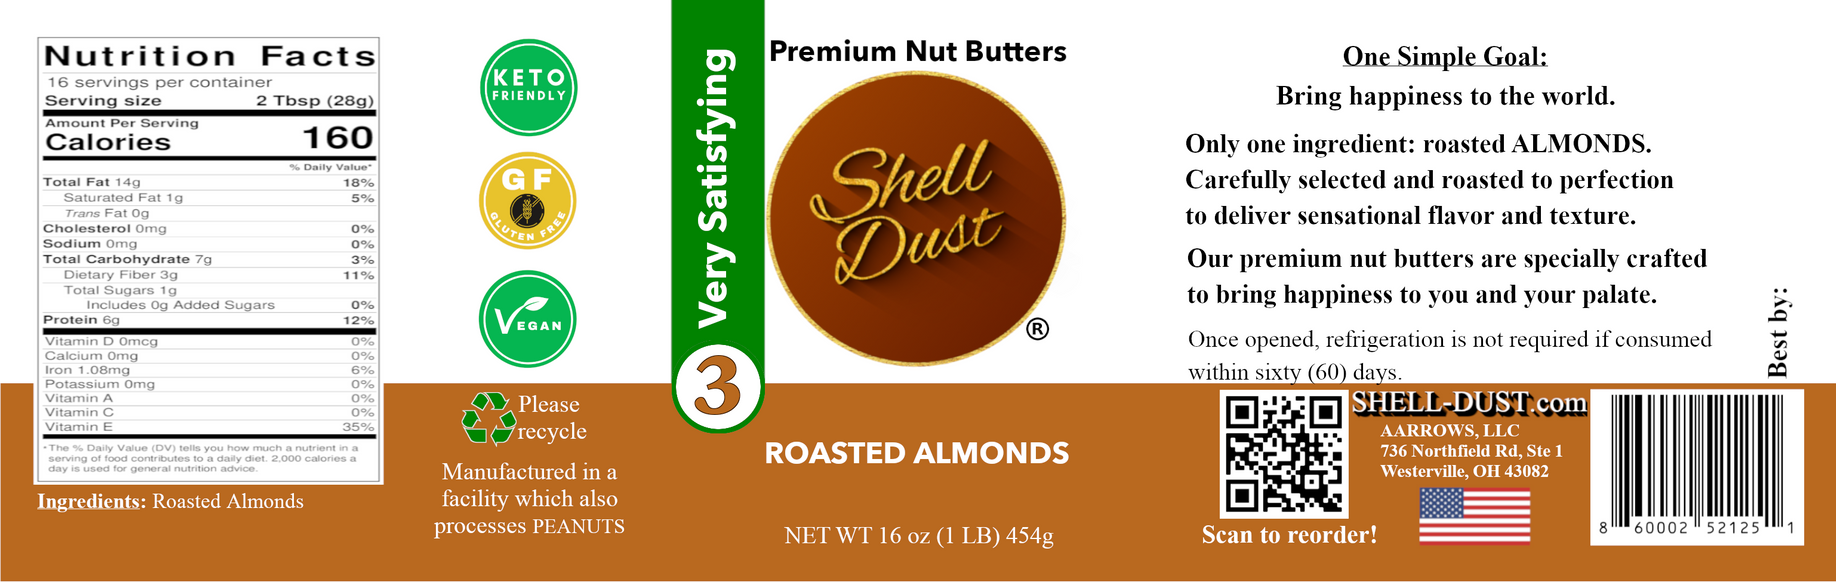 6 Pack: All Natural Roasted Almond Butter